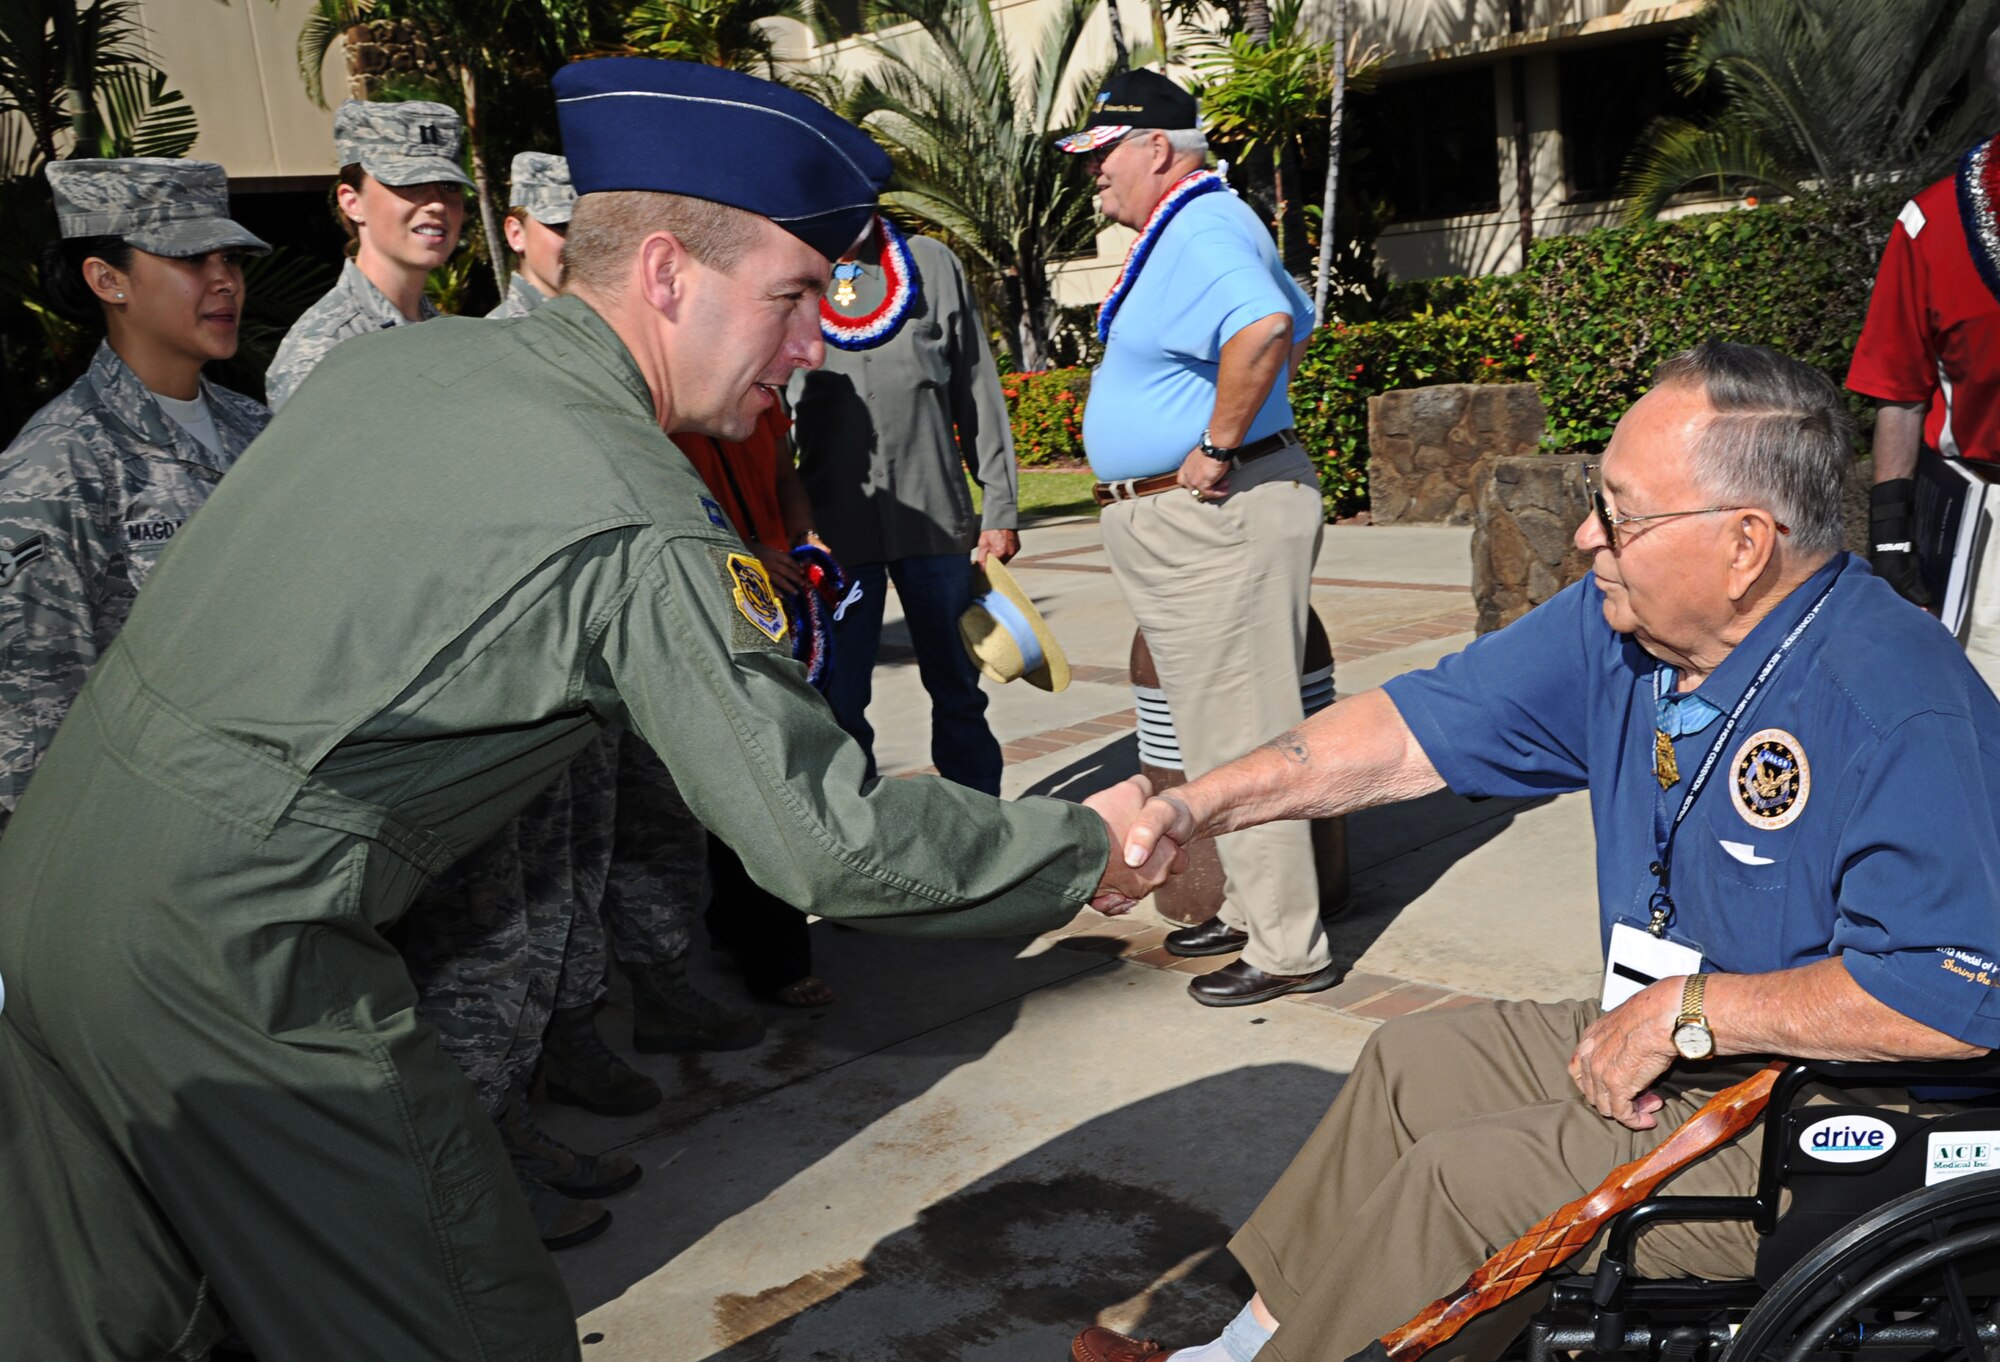 Capt. Andy Stewart, C-17 Globemaster III instructor pilot, greets Sgt. 1st Class (Ret.) Ronald Rosser, a U.S. Army veteran of the Korean War and a Medal of Honor recipient, while Rosser, along with three other Medal of Honor recipients, visited Joint Base Pearl Harbor-Hickam, Hawaii, Oct. 4. Rosser was a corporal when he performed the actions that earned him his medal on the side of a snow-covered hill in 1952. (U.S. Air Force photo/Senior Airman Lauren Main)